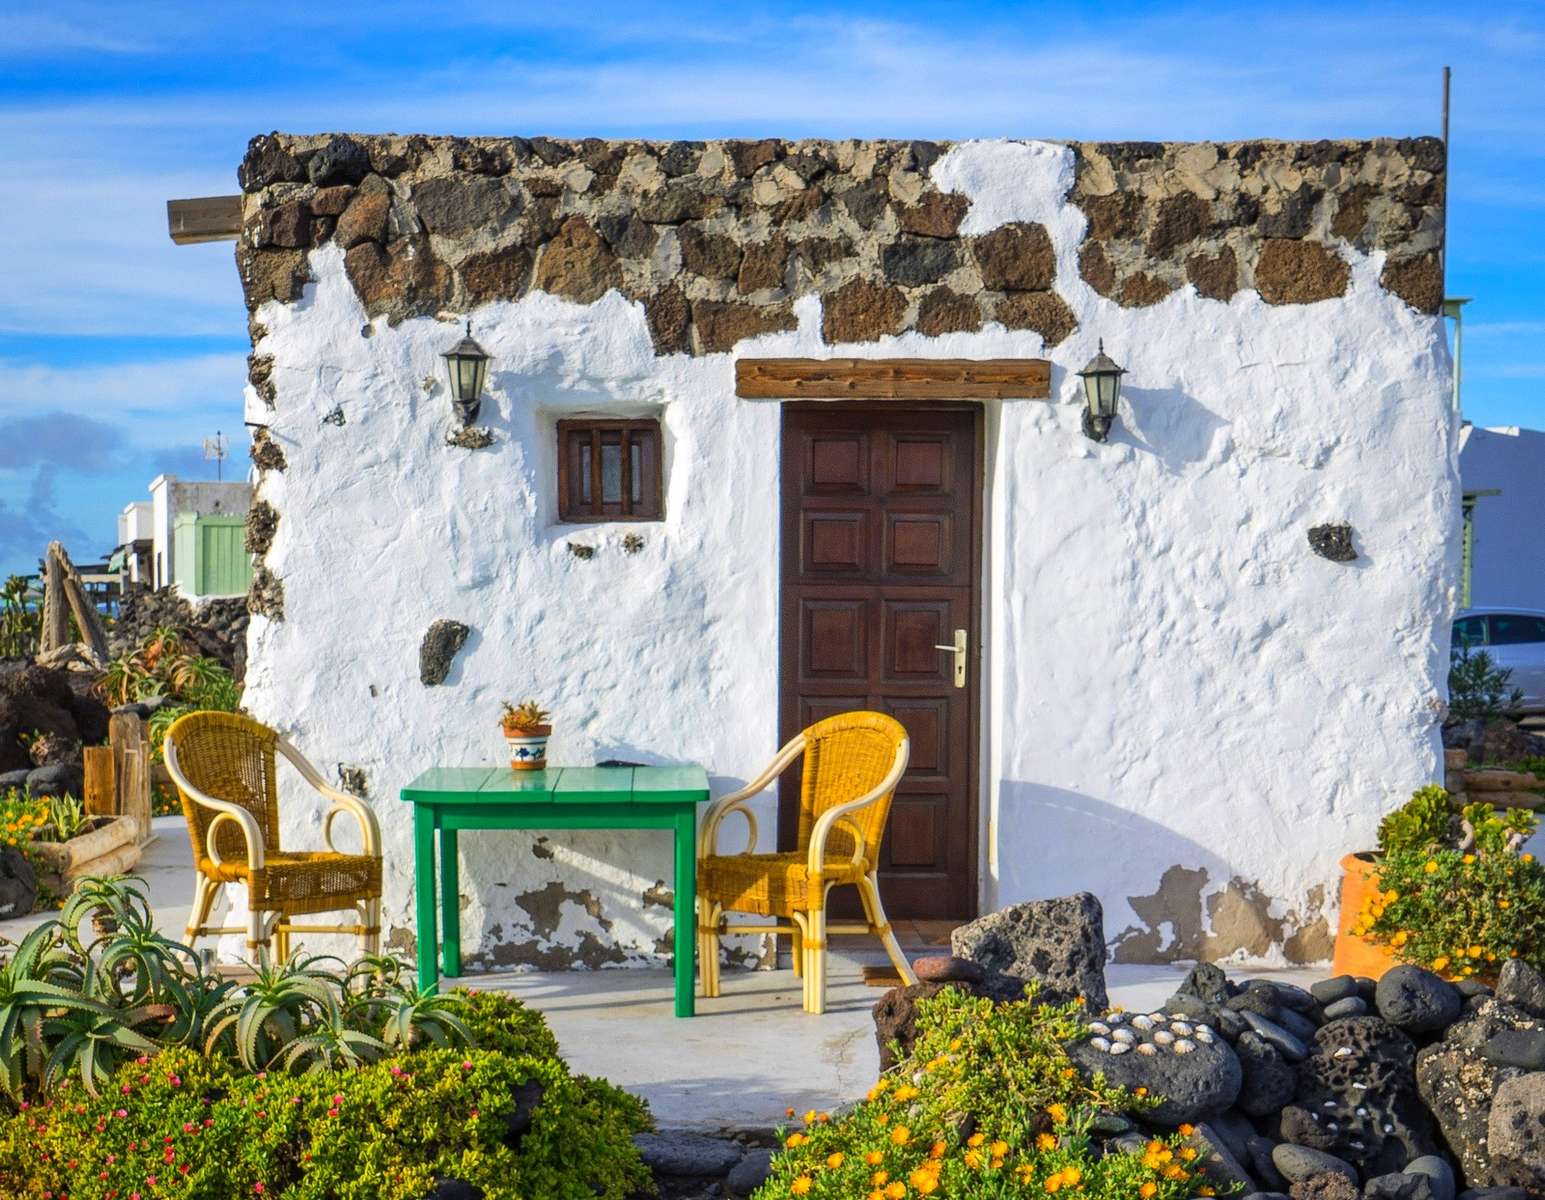 Holiday home in Lanzarote (Canary Islands) online puzzle